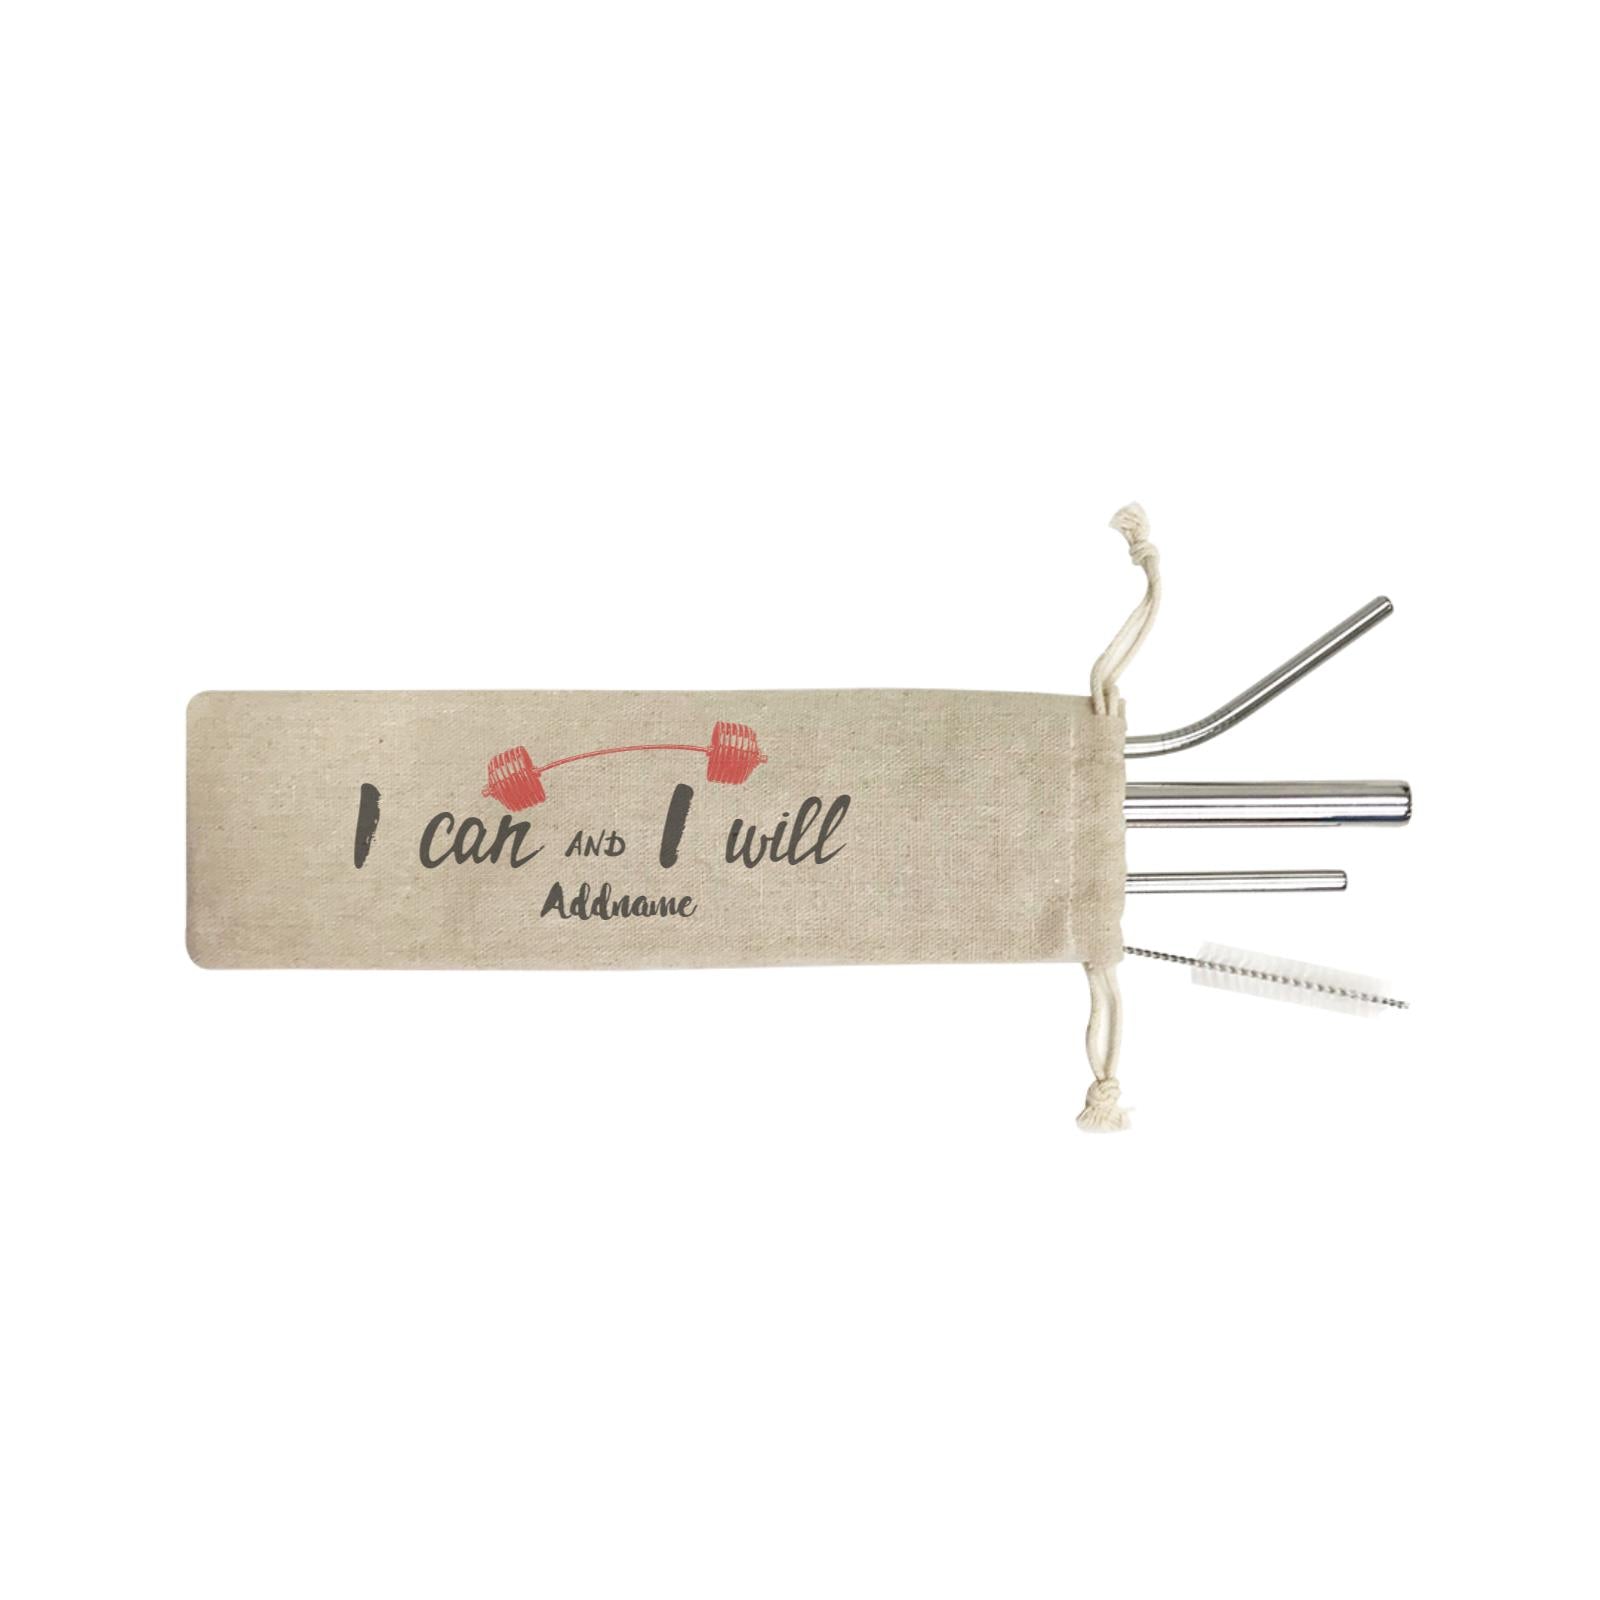 Inspiration Quotes Weights Barbell I Can and I Will Addname SB 4-in-1 Stainless Steel Straw Set In a Satchel